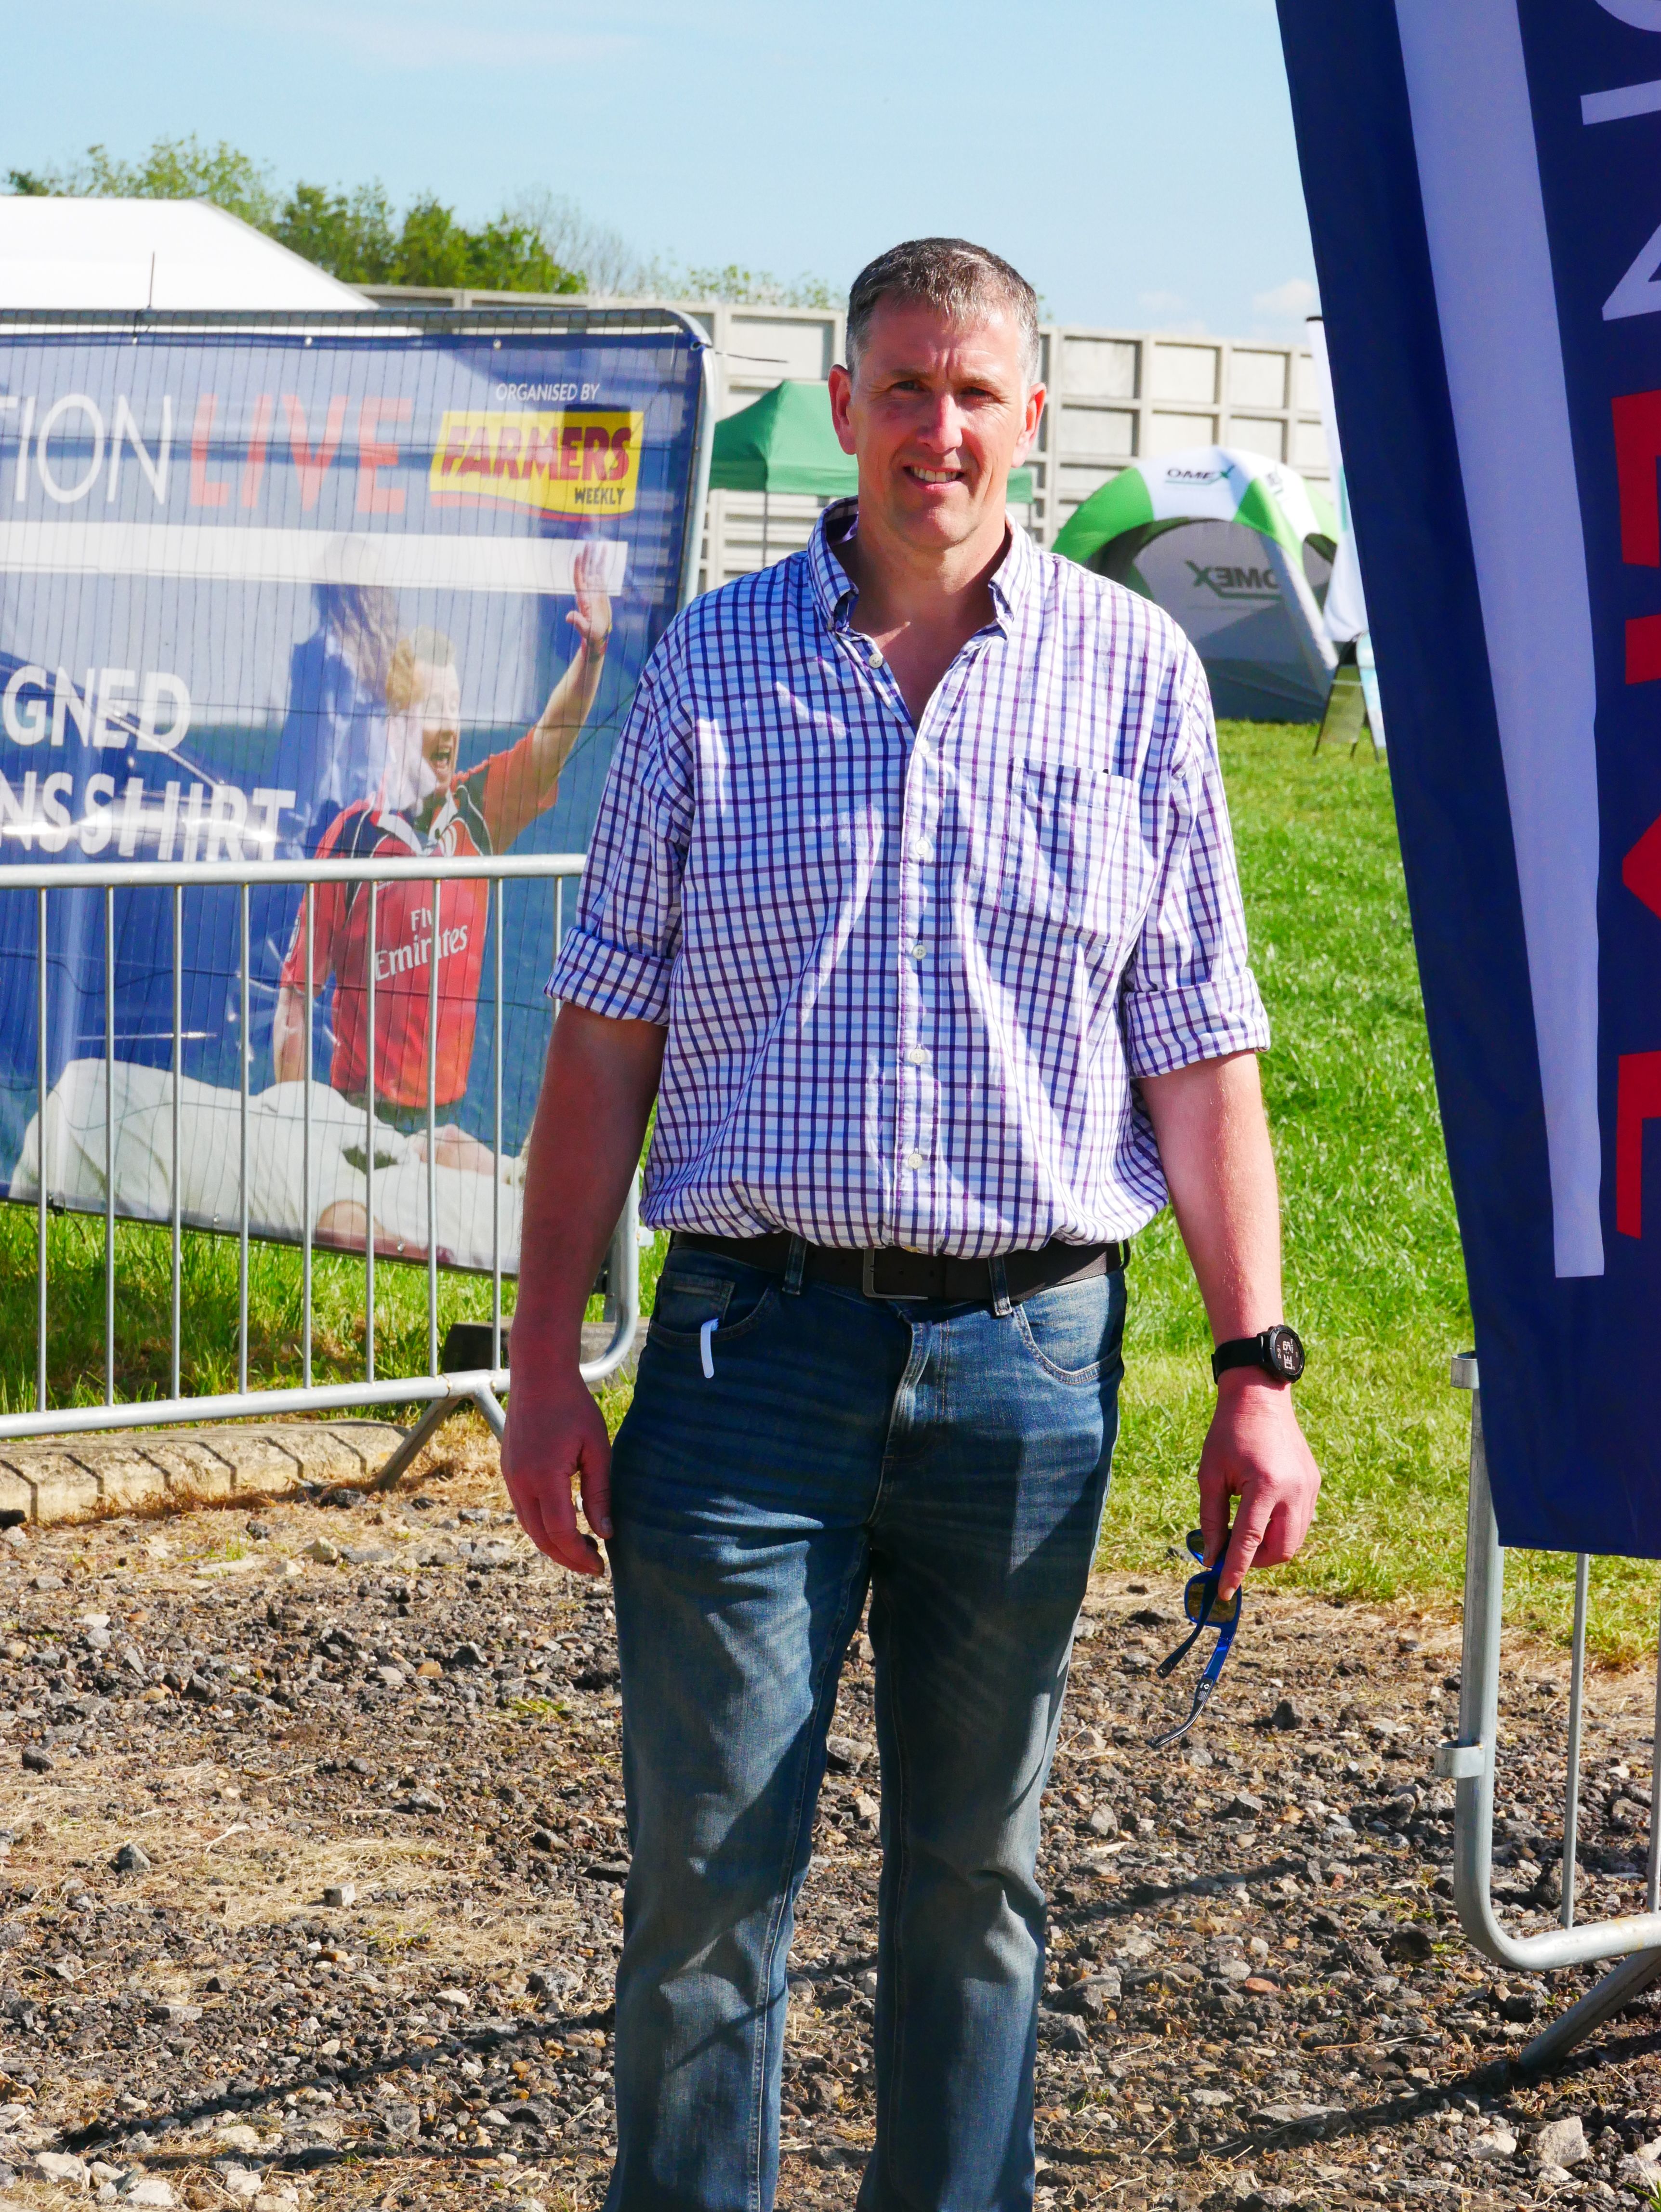 Park Farm Manager Paul Kelly stands next to a Transition Live banner